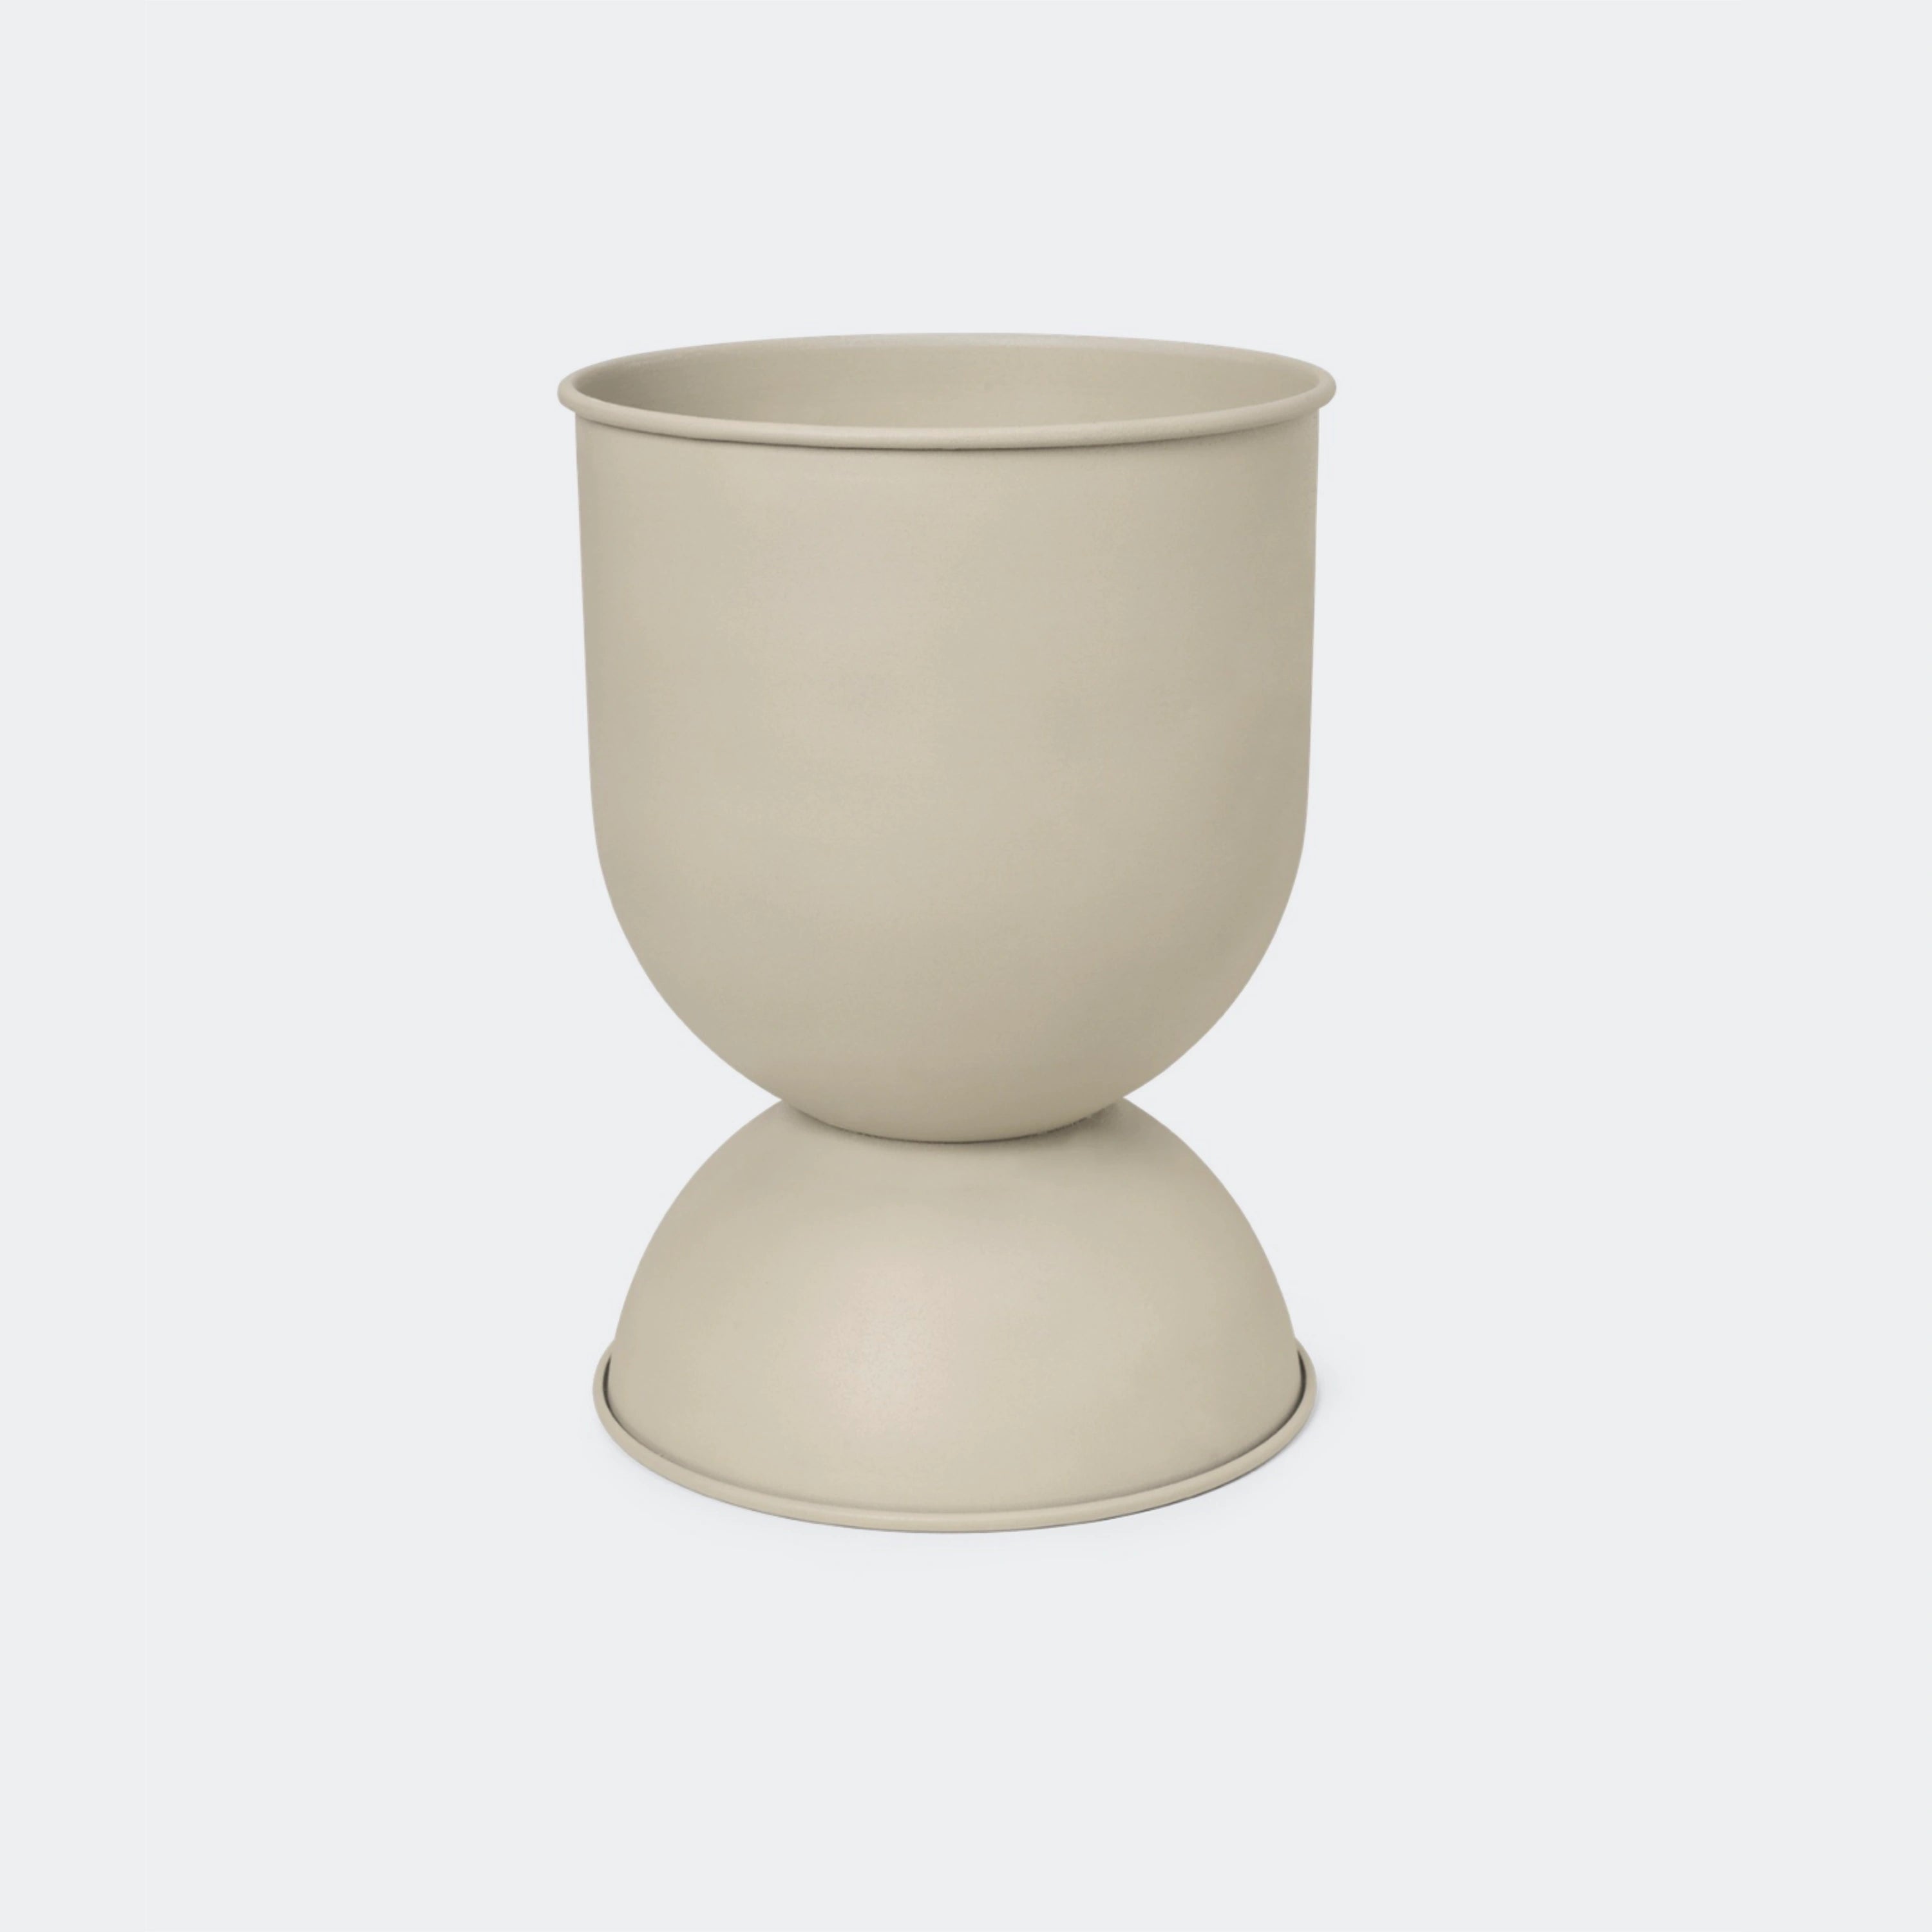 Ferm Living Hourglass Pot, Cashmere Large - KANSO#Select Size_Large